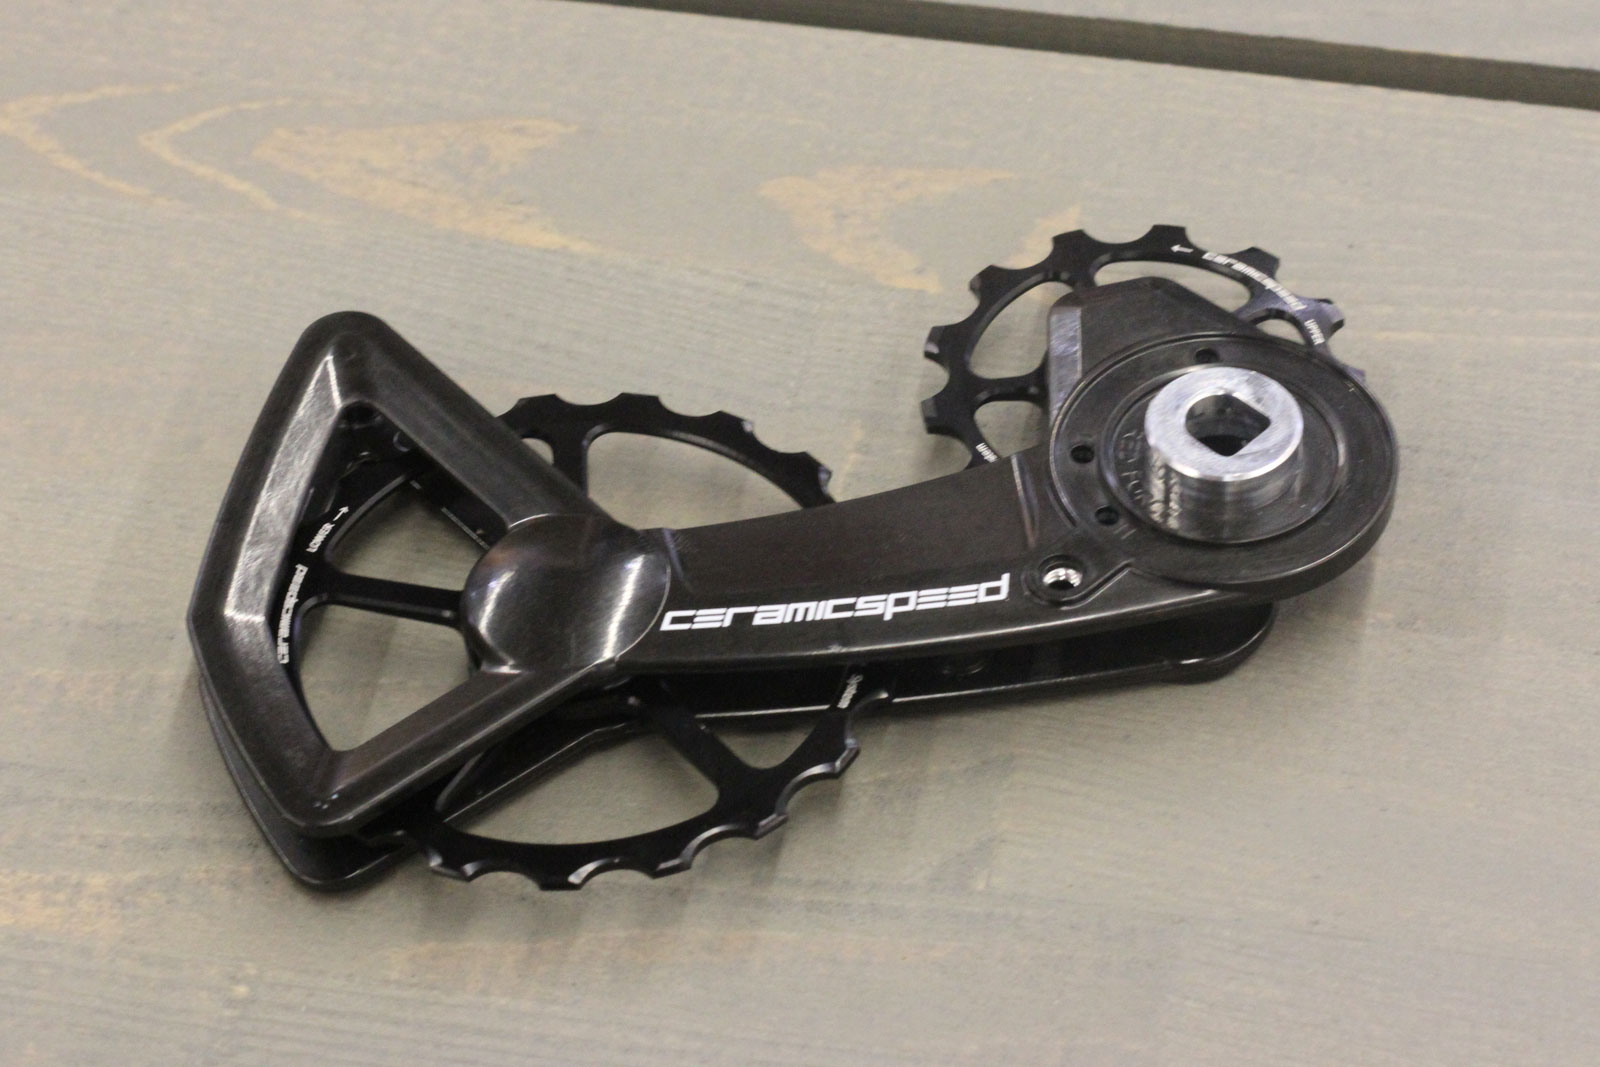 ceramicspeed ospw xplr gravel derailleur cage upgrade red force rival